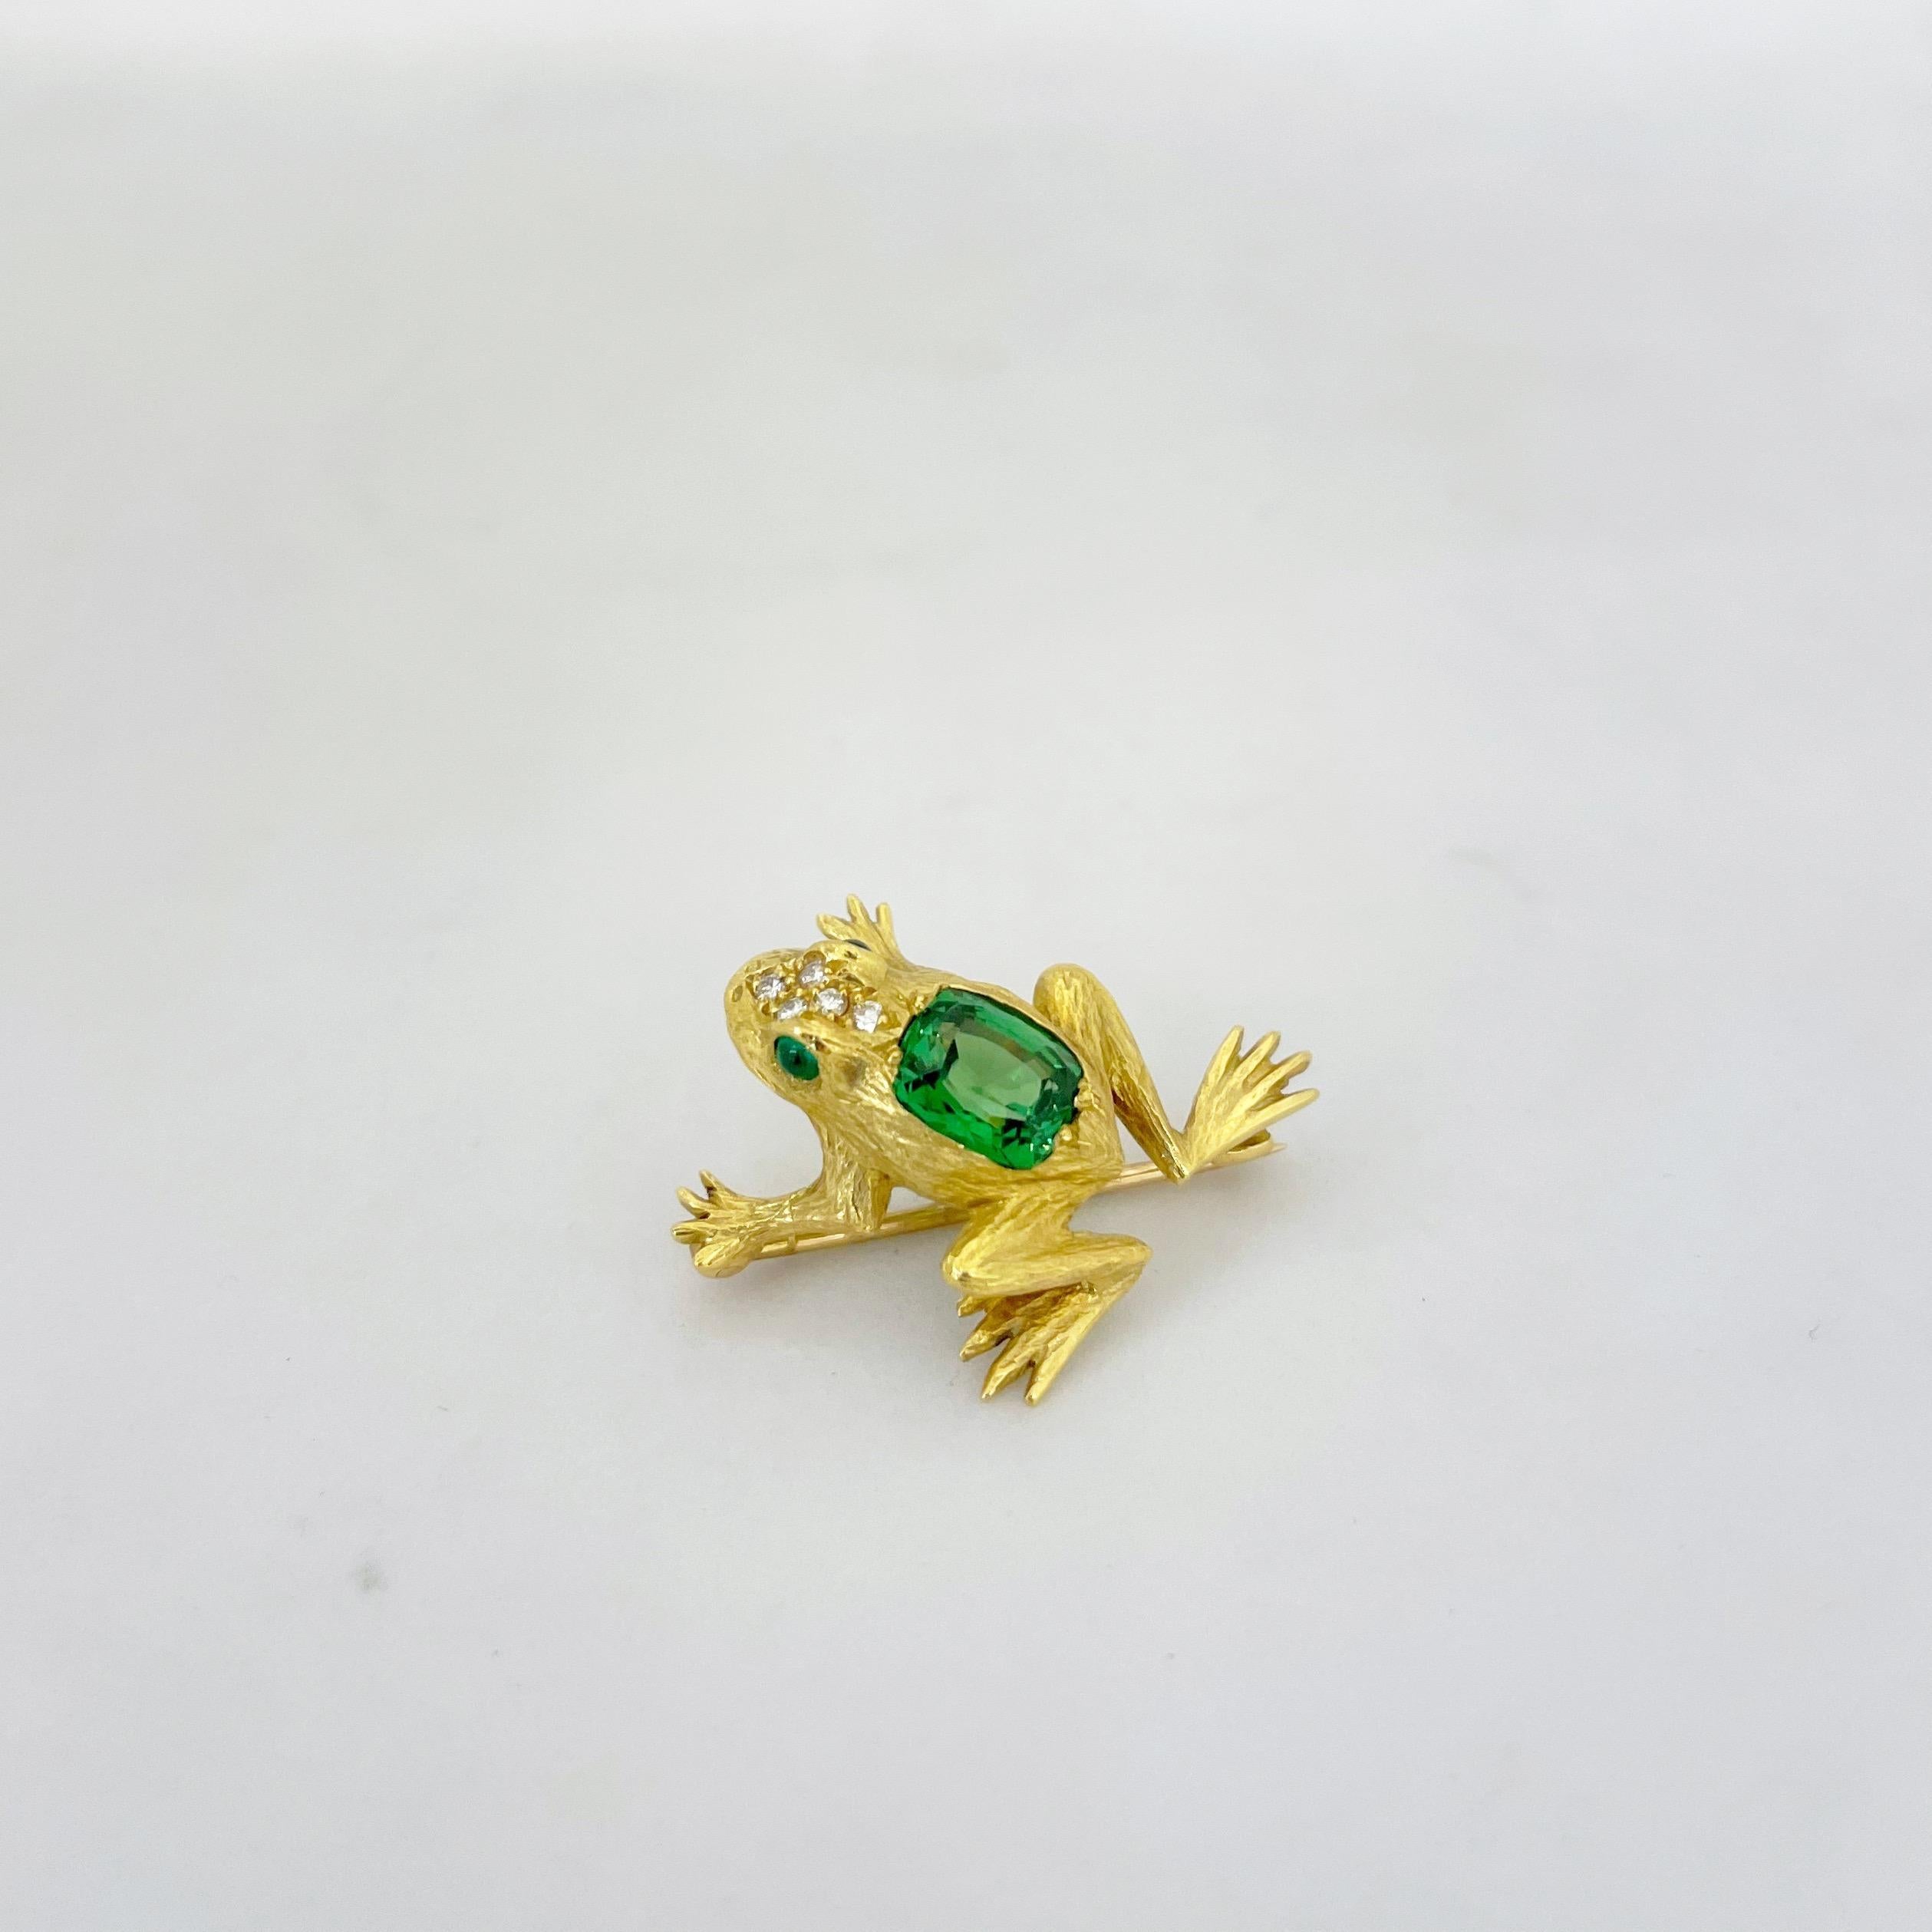 E. Wolfe & Co is a family-run fine jewellery manufacturing Workshop, established in 1850 and located in central London. They specialize in creating beautiful bespoke pieces.
This adorable frog brooch is the perfect example of their unsurpassed